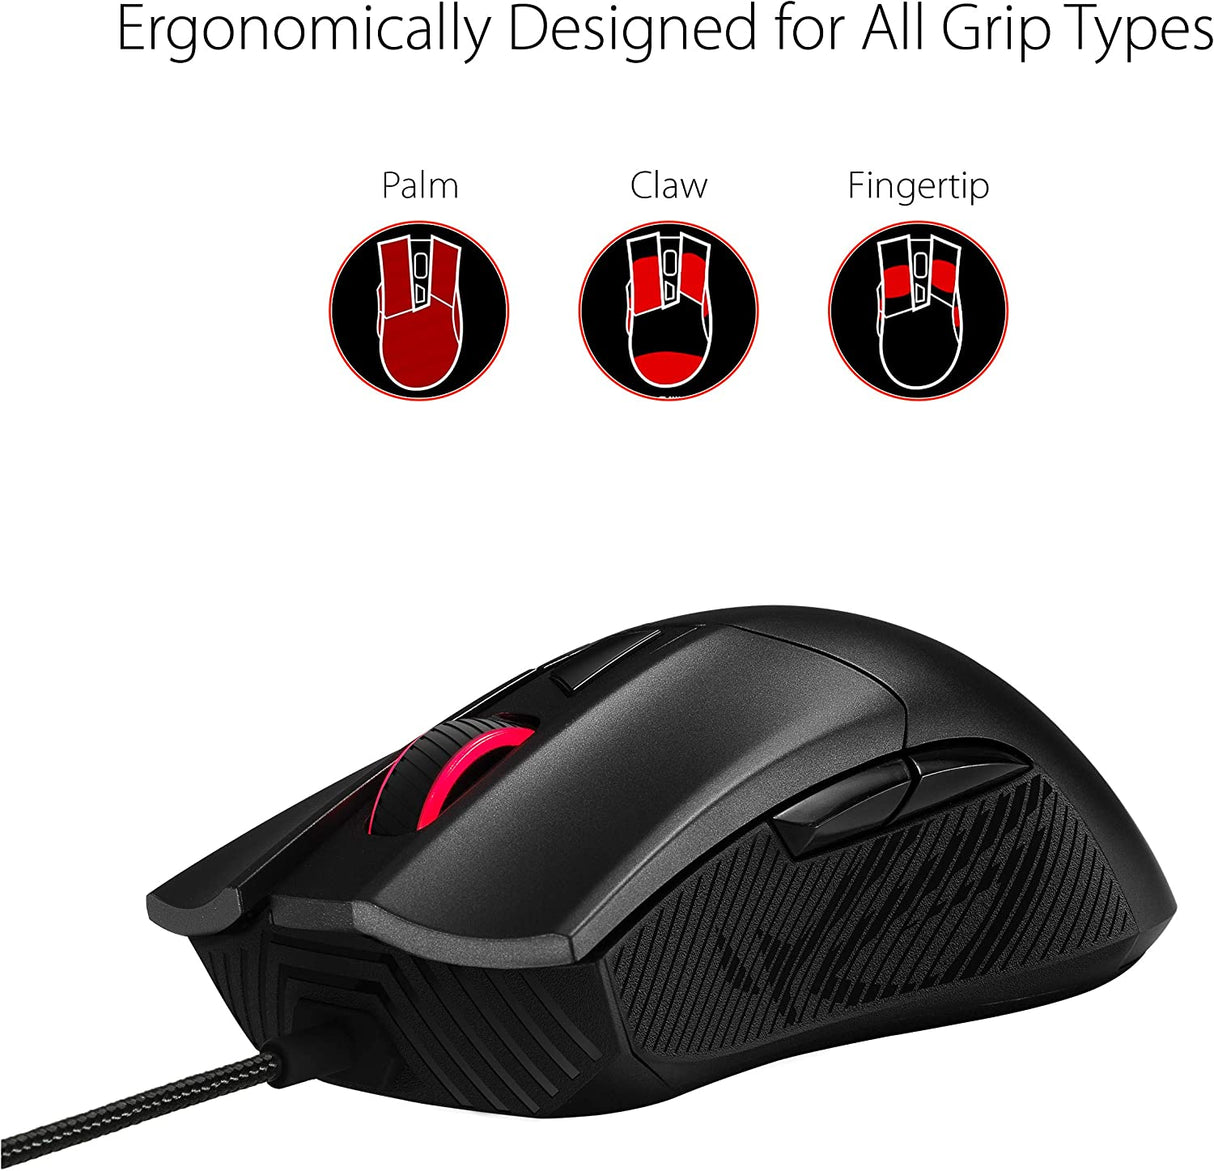 ASUS Optical Gaming Mouse - ROG Gladius II Core | Ergonomic Right-hand Grip | Lightweight PC Gaming Mouse | 6200 DPI Optical Sensor | Omron Switches | 6 Buttons | Aura Sync RGB Lighting Gladius II Core (Wired) Black